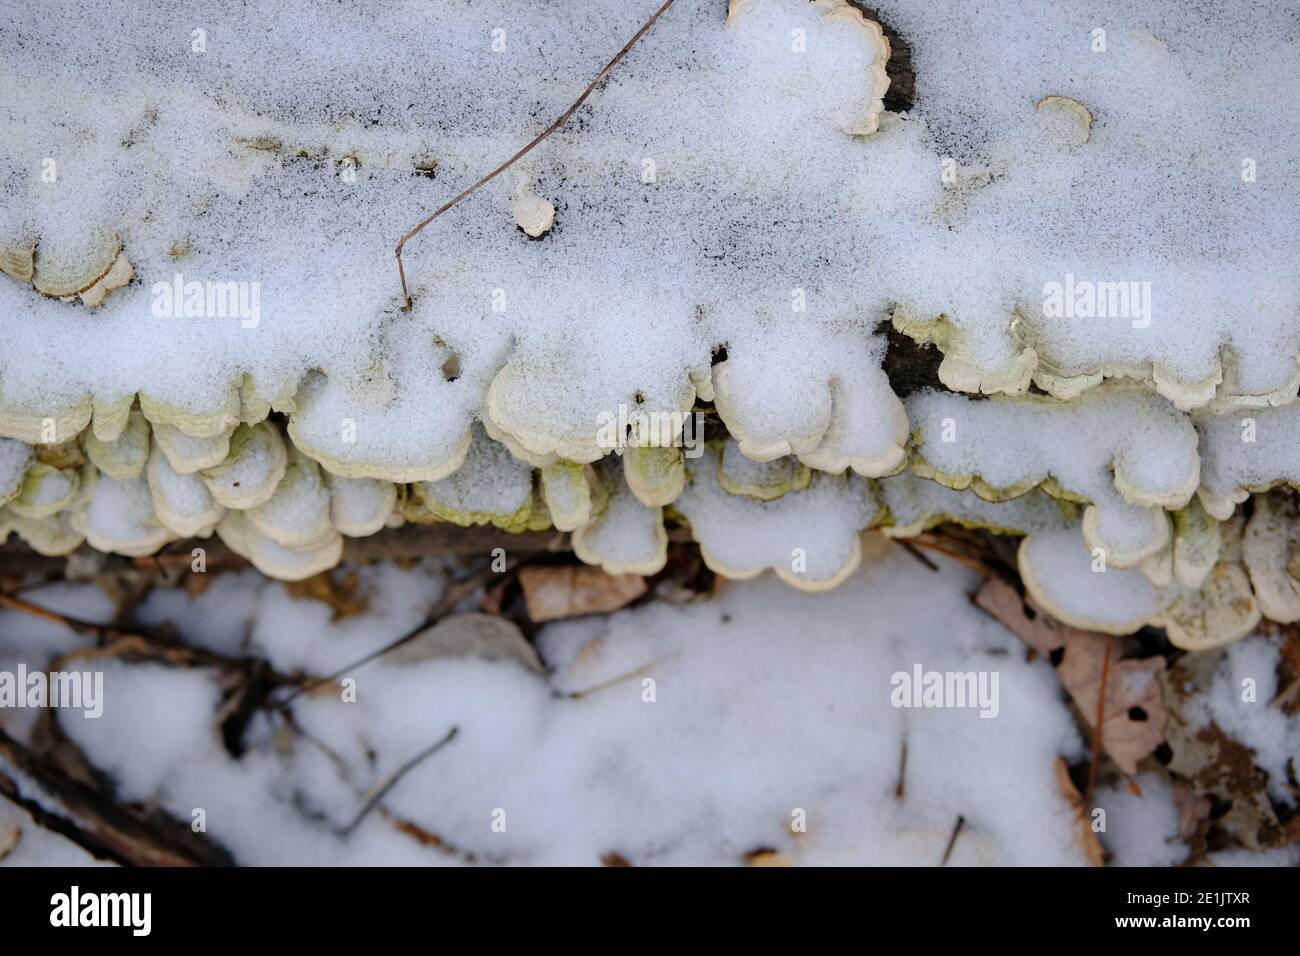 Old turkey tail bracket fungus (Trametes versicolor) on the top of a fallen log in winter totally covered in snow. Ottawa, Ontario, Canada. Stock Photo